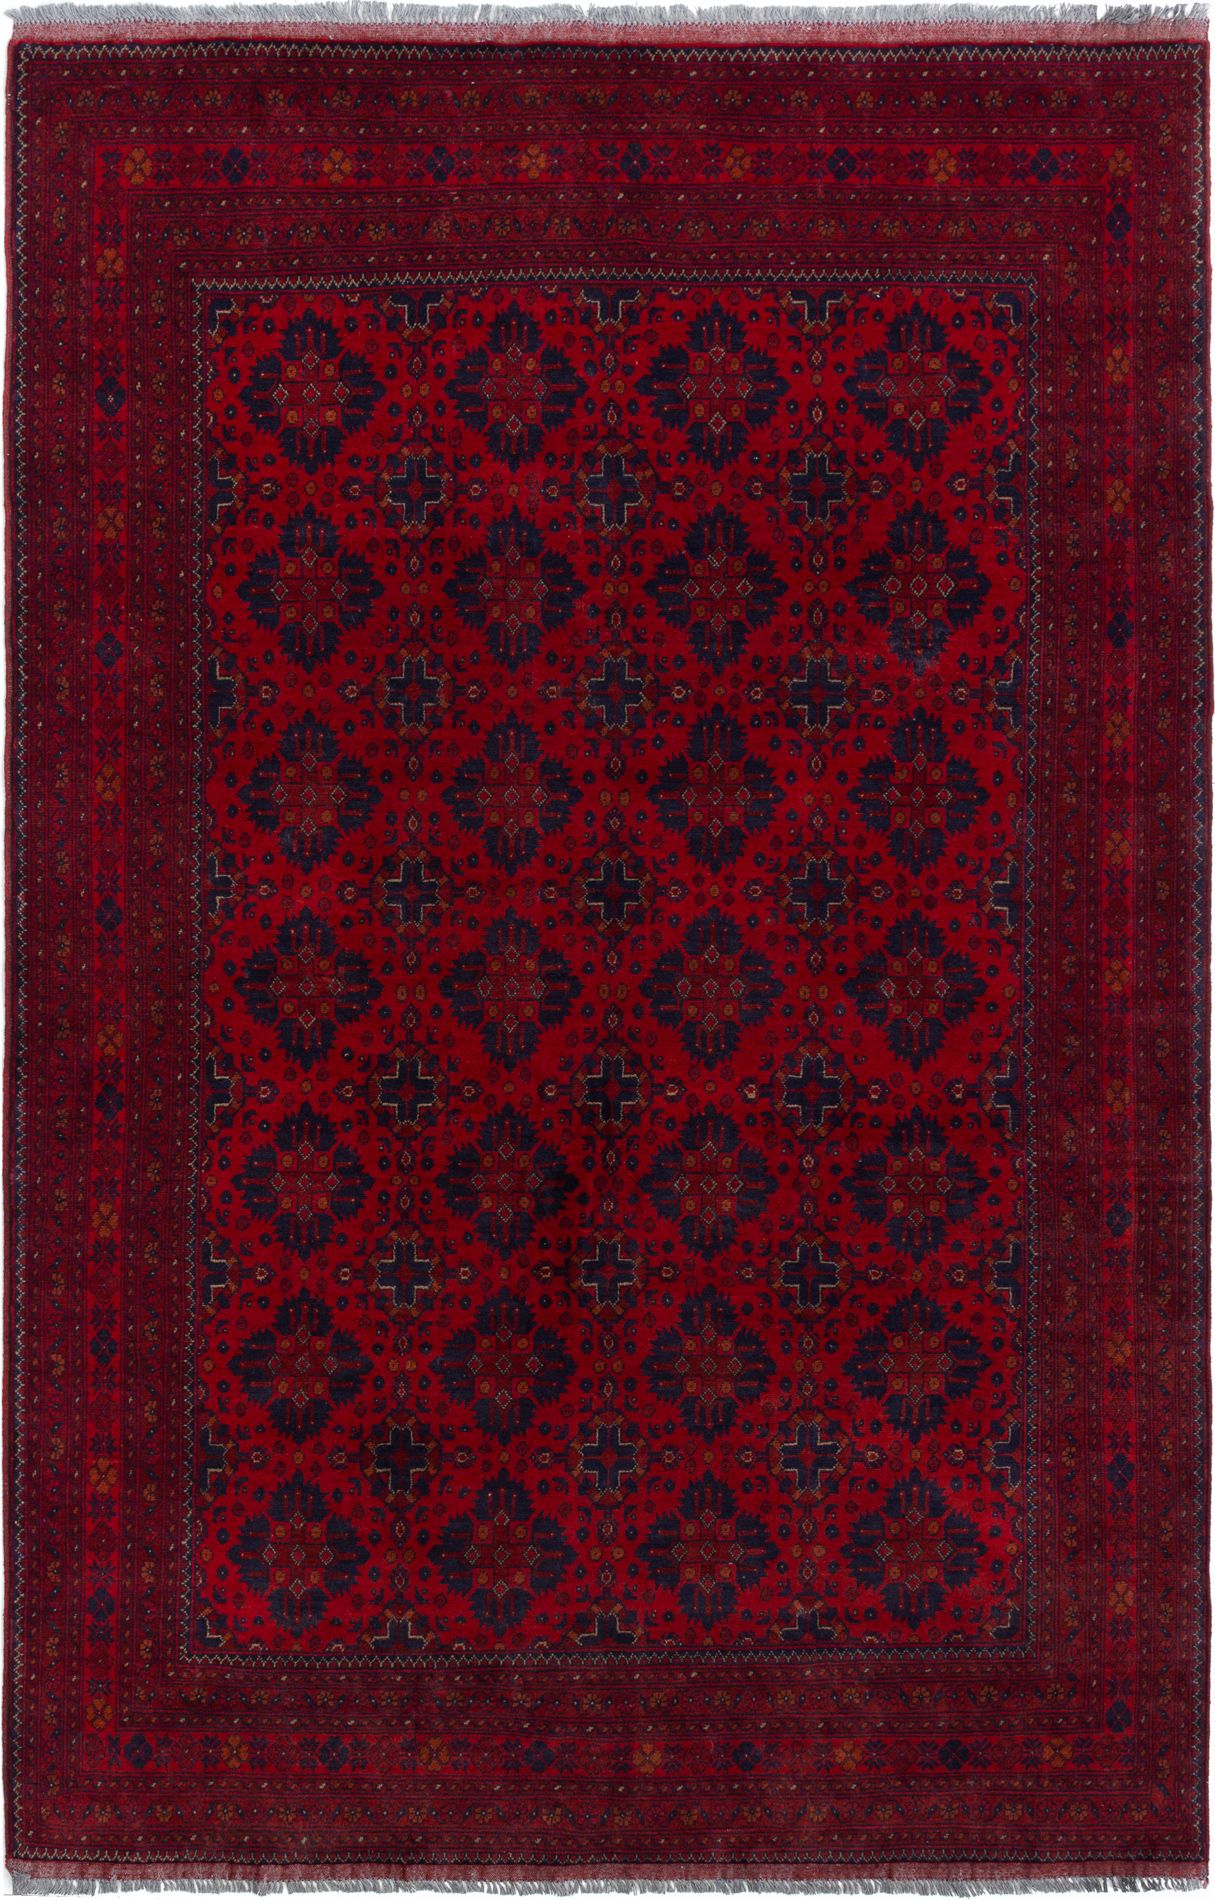 Hand-knotted Finest Khal Mohammadi Red Wool Rug 6'3" x 6'8" Size: 6'3" x 6'8"  